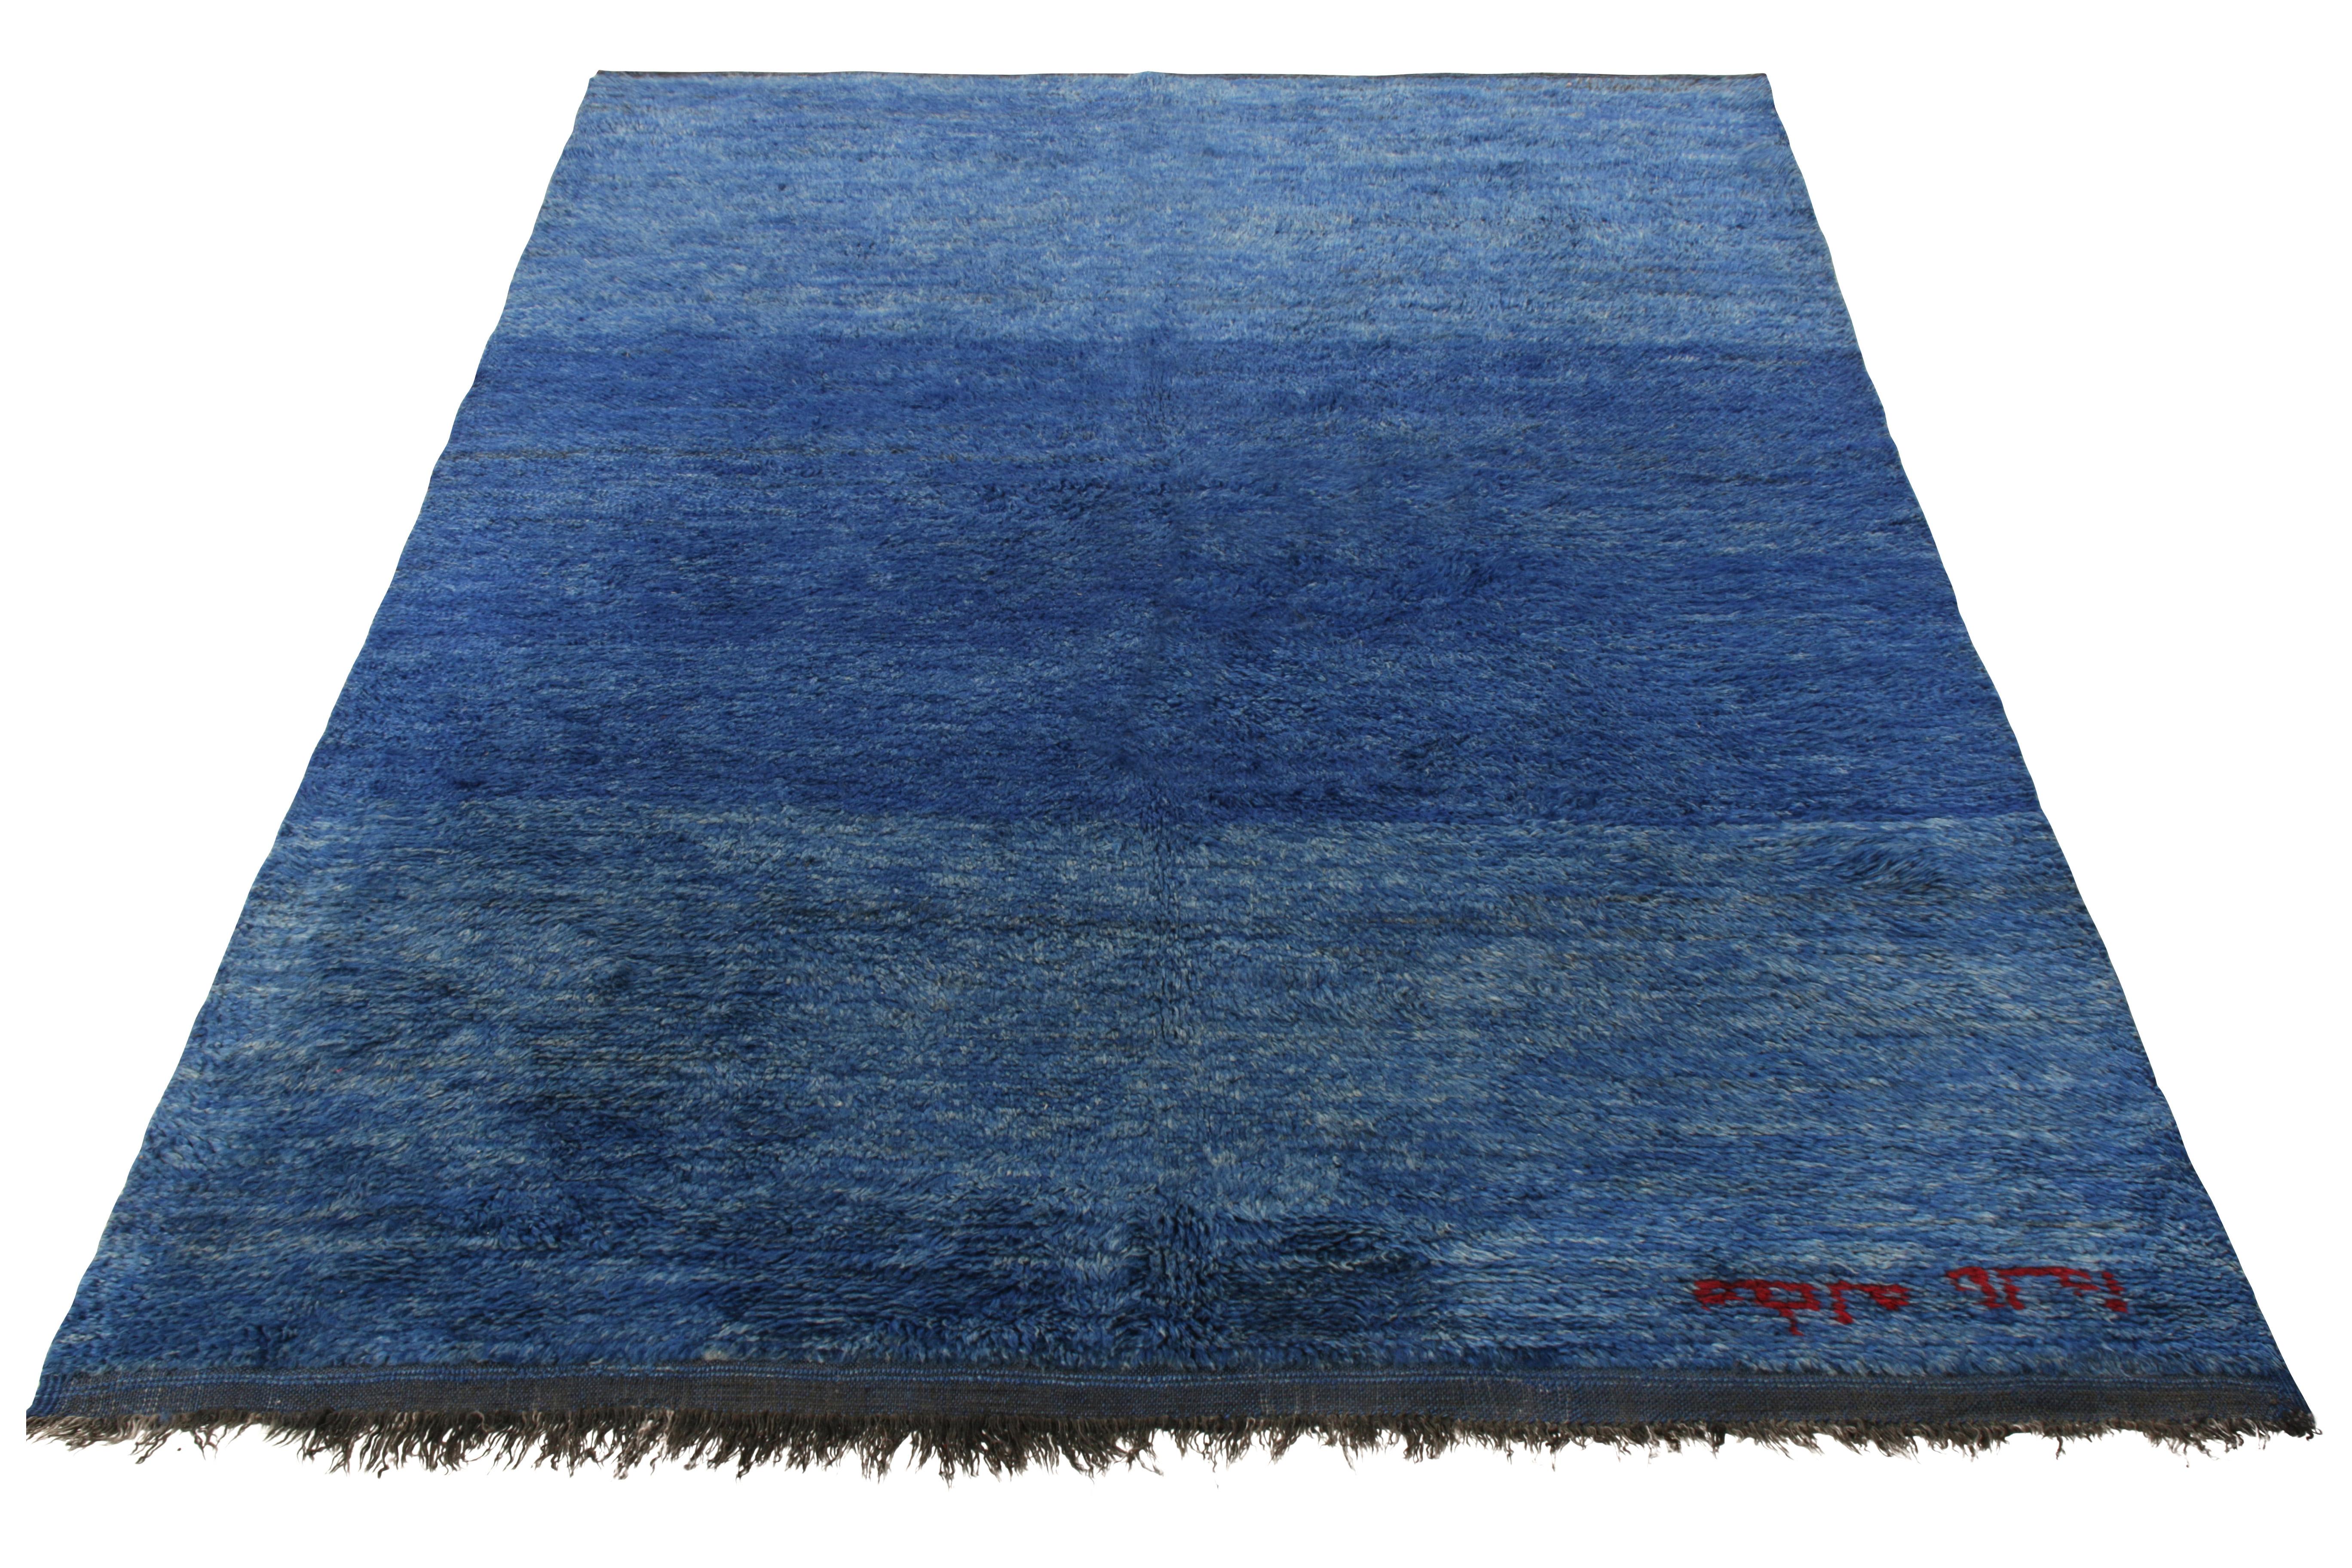 Hand knotted in wool from Morocco circa 1950-1960, this vintage 6x9 Moroccan Berber rug enjoys a luscious high pile in a soothing gradiance—playing tone-on-tone in shades of blue for a luxe take in such solid color tribal style. The rug further